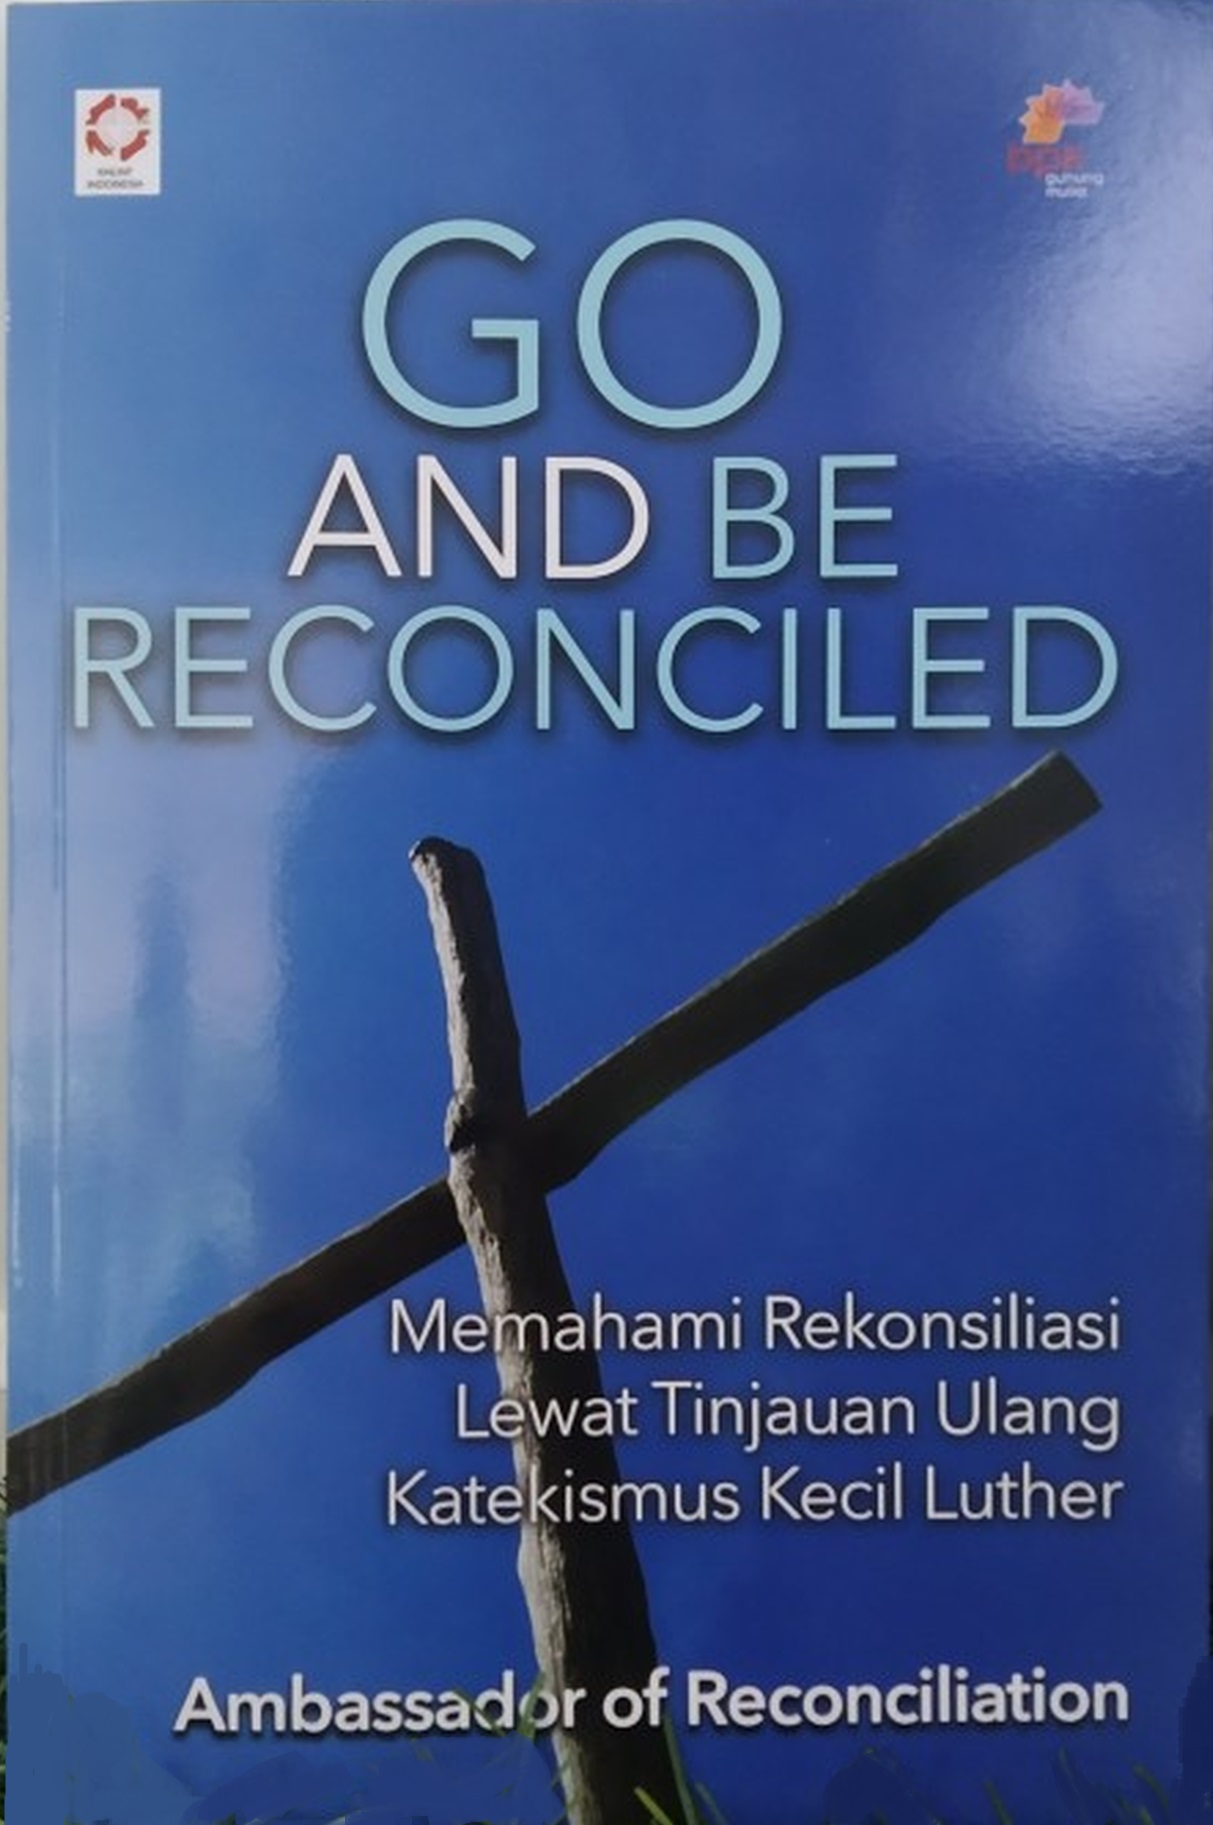 Go and be reconciled